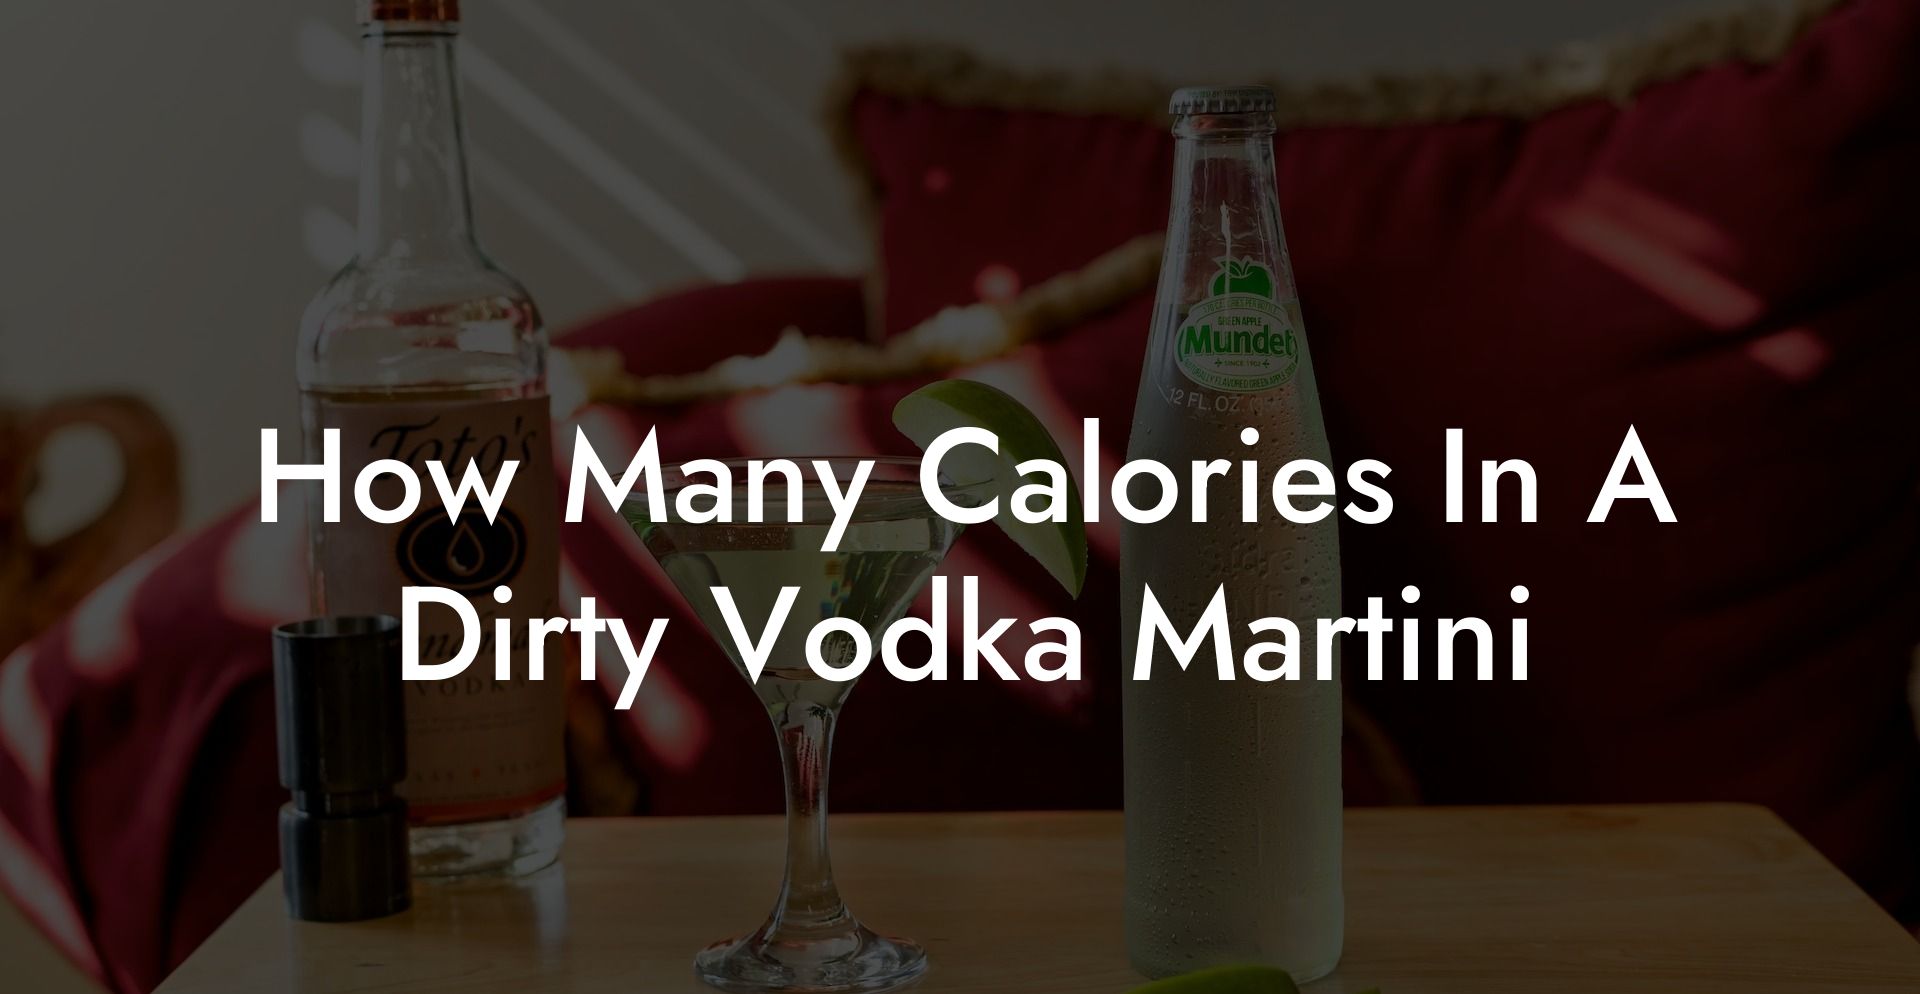 How Many Calories In A Dirty Vodka Martini